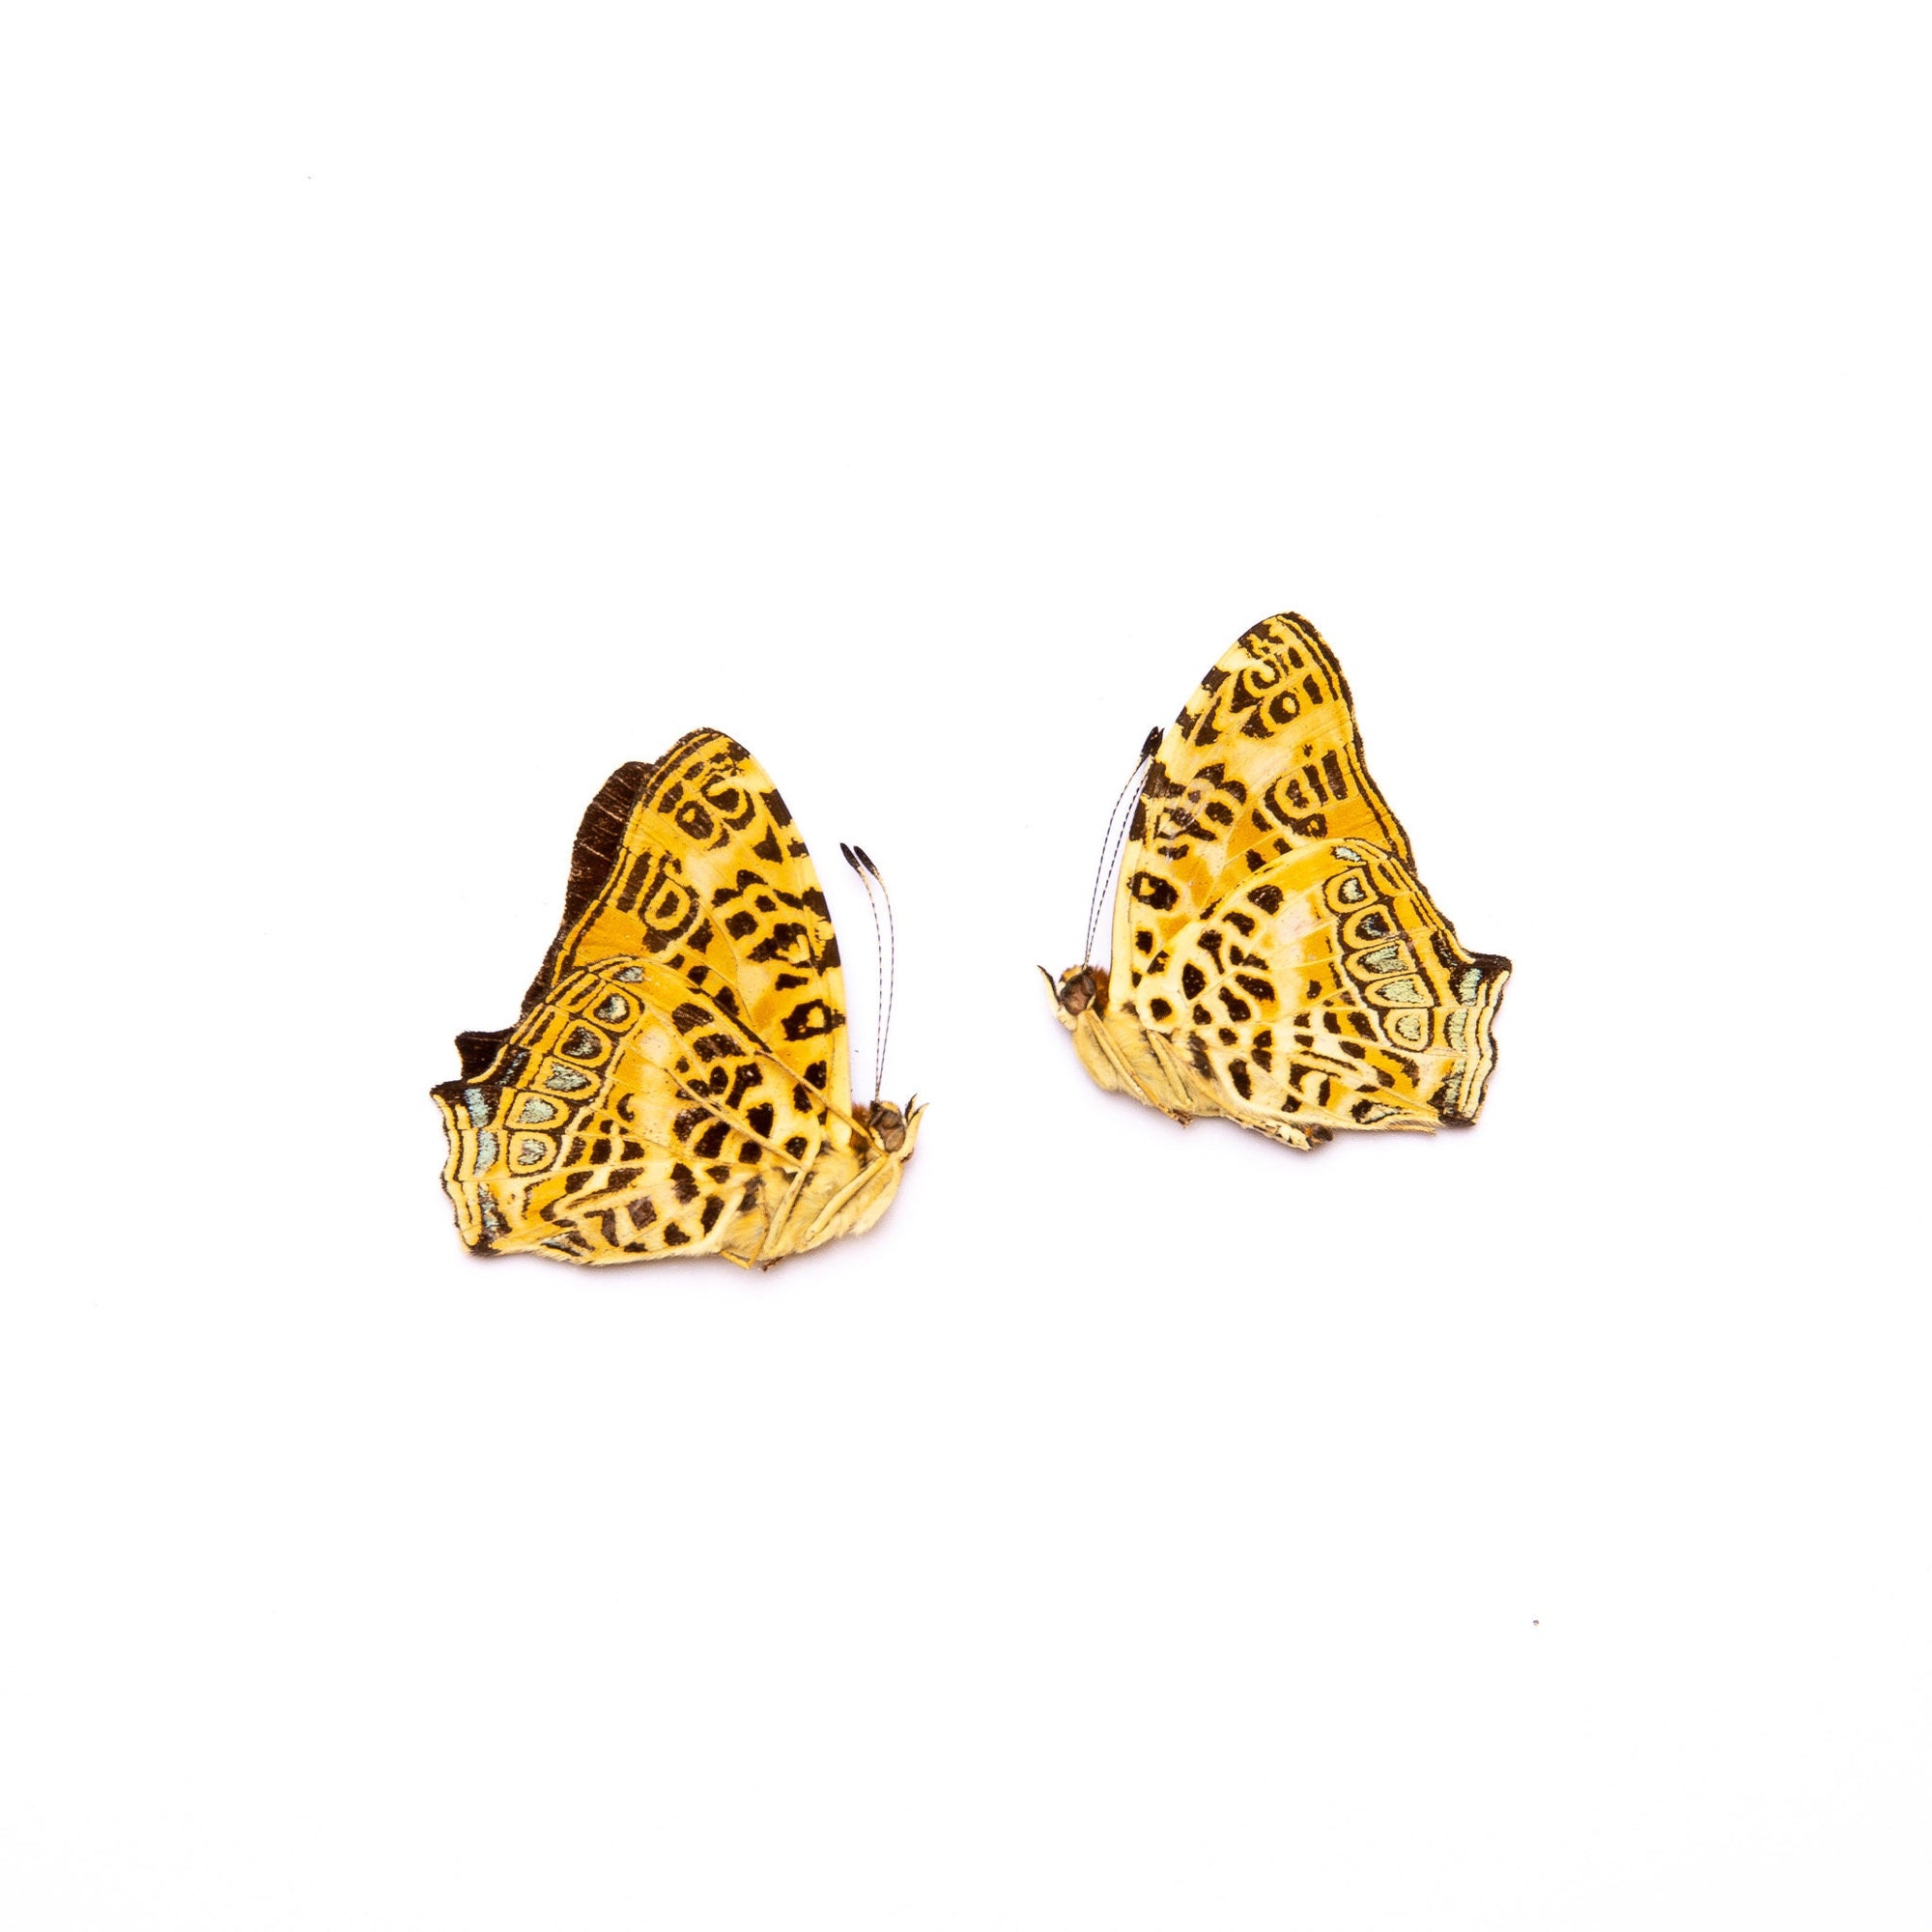 TWO (2) Symbrenthia hypselis | A1 Real Dry-Preserved Butterflies | Unmounted Entomology Taxidermy Specimens